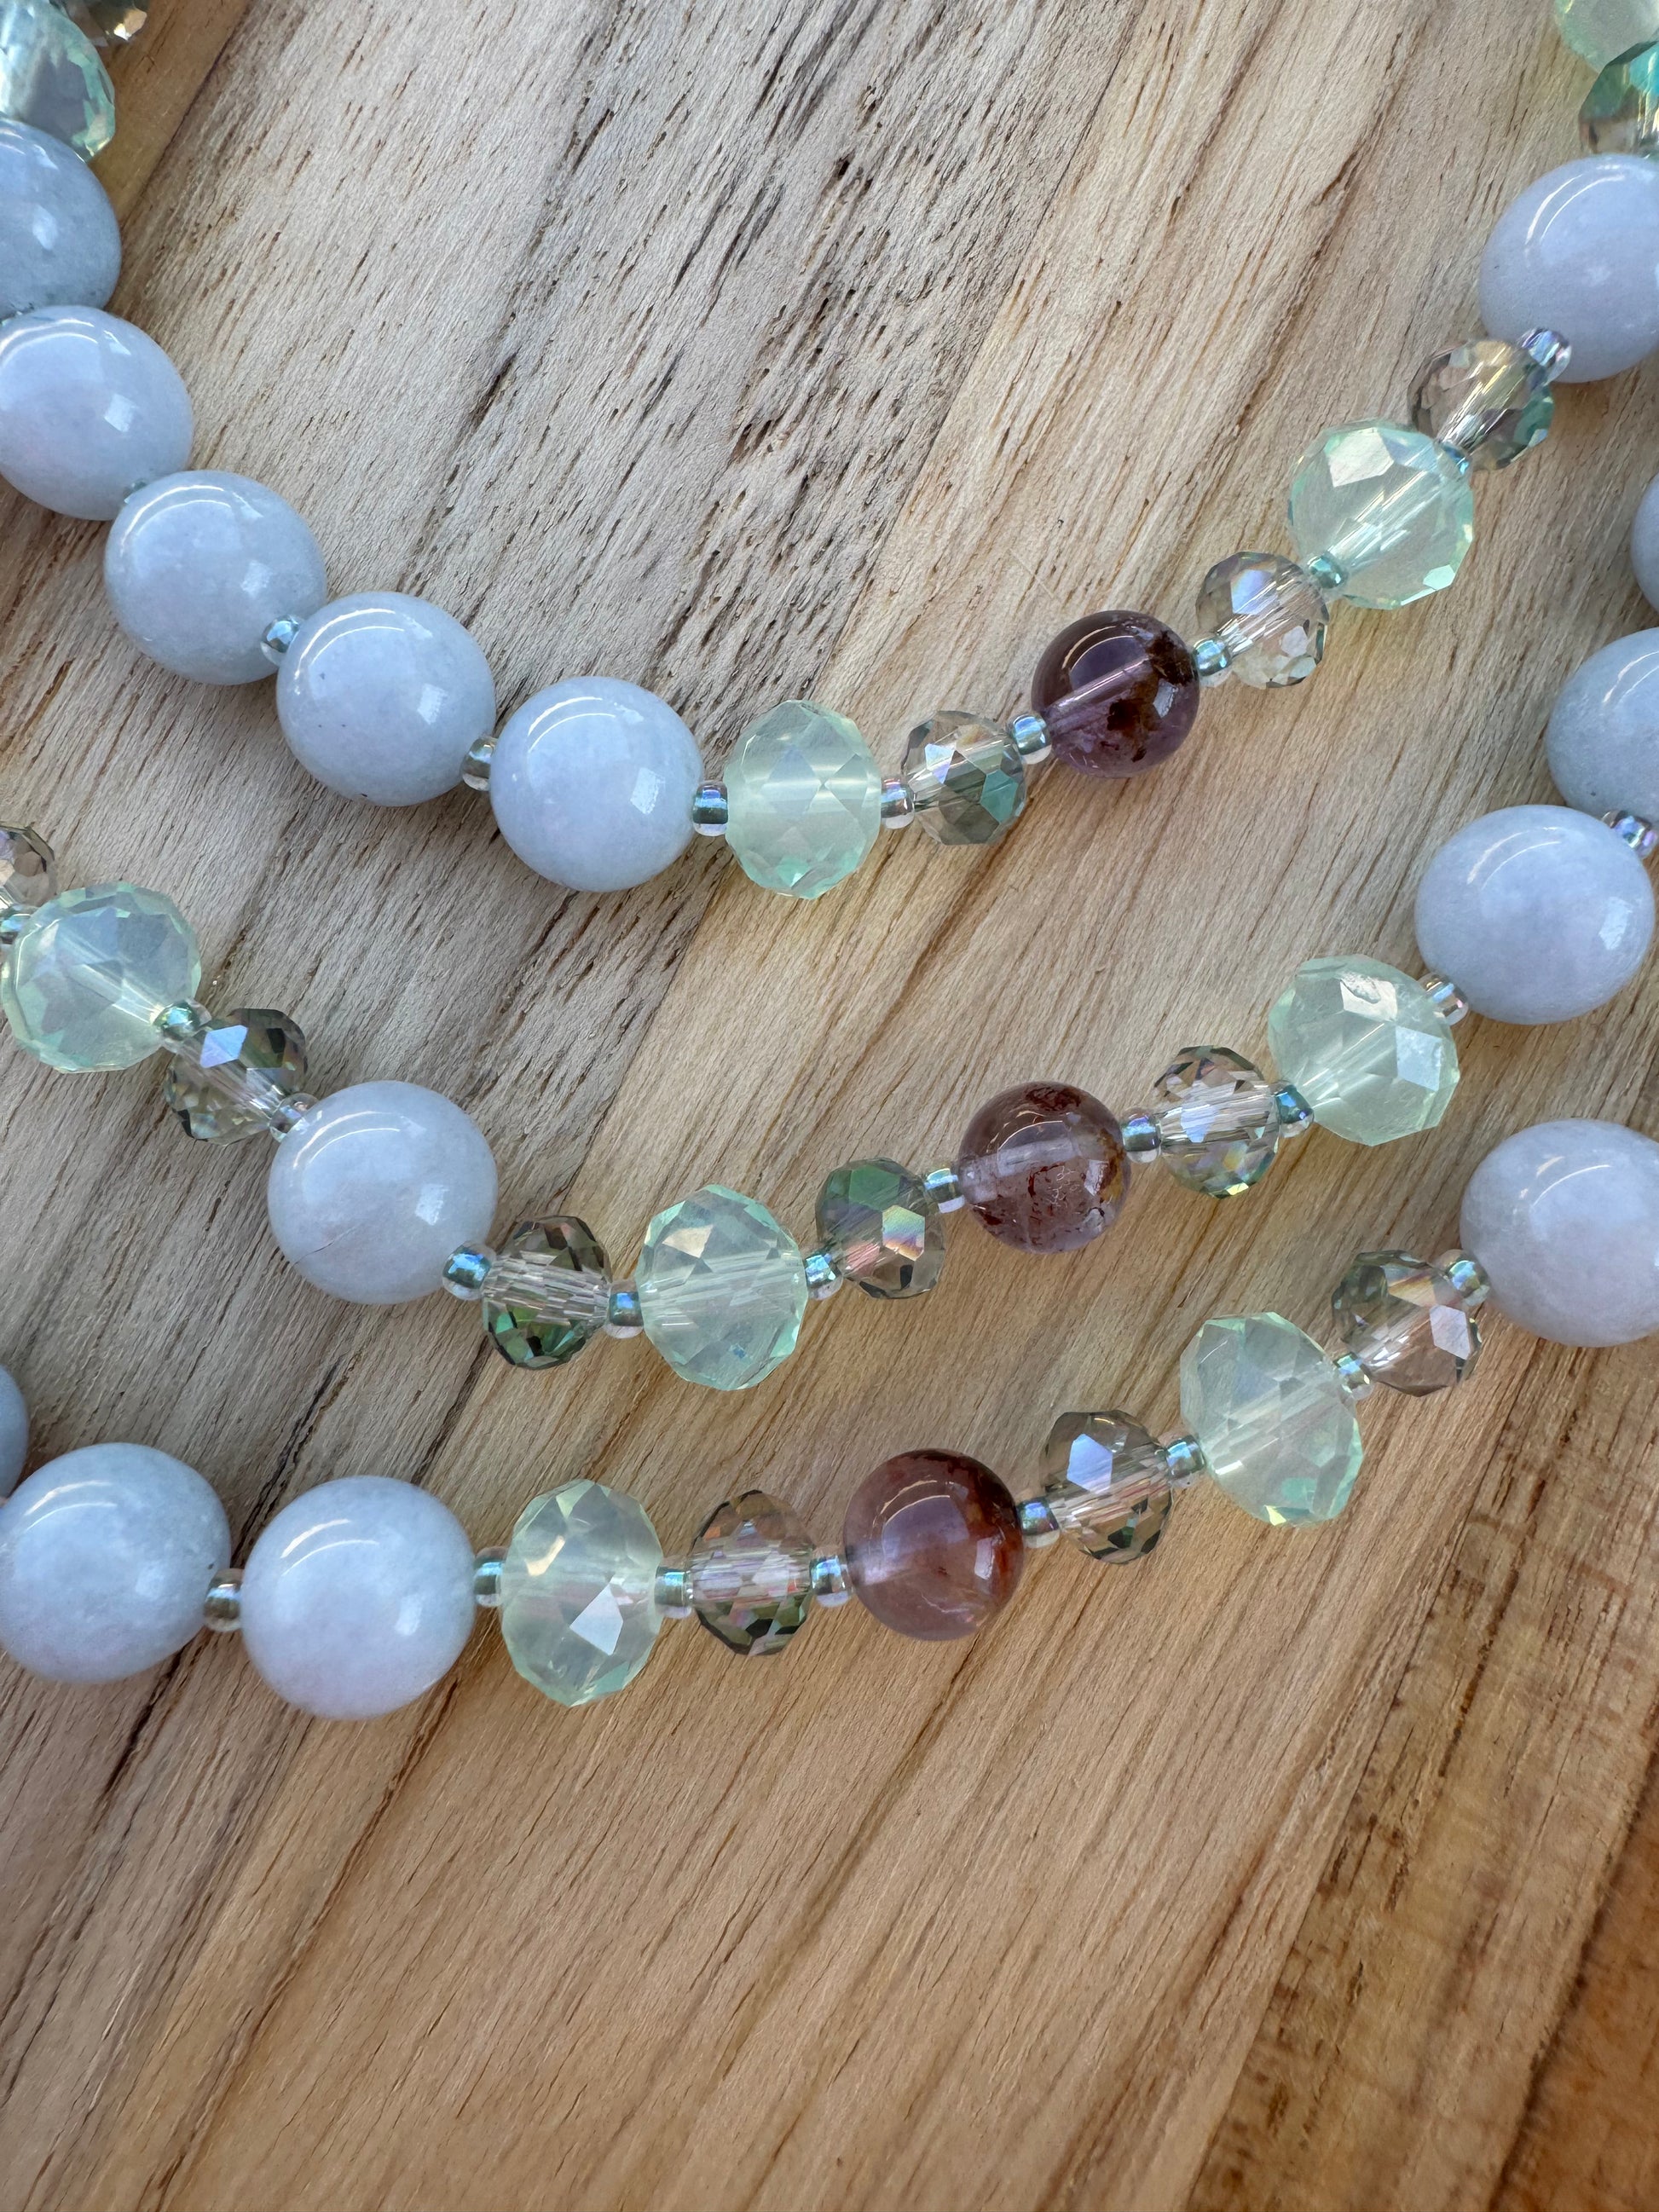 60" Extra Long Wraparound Beaded Necklace with Aquamarine Super 7 and Crystal Glass Beads - My Urban Gems